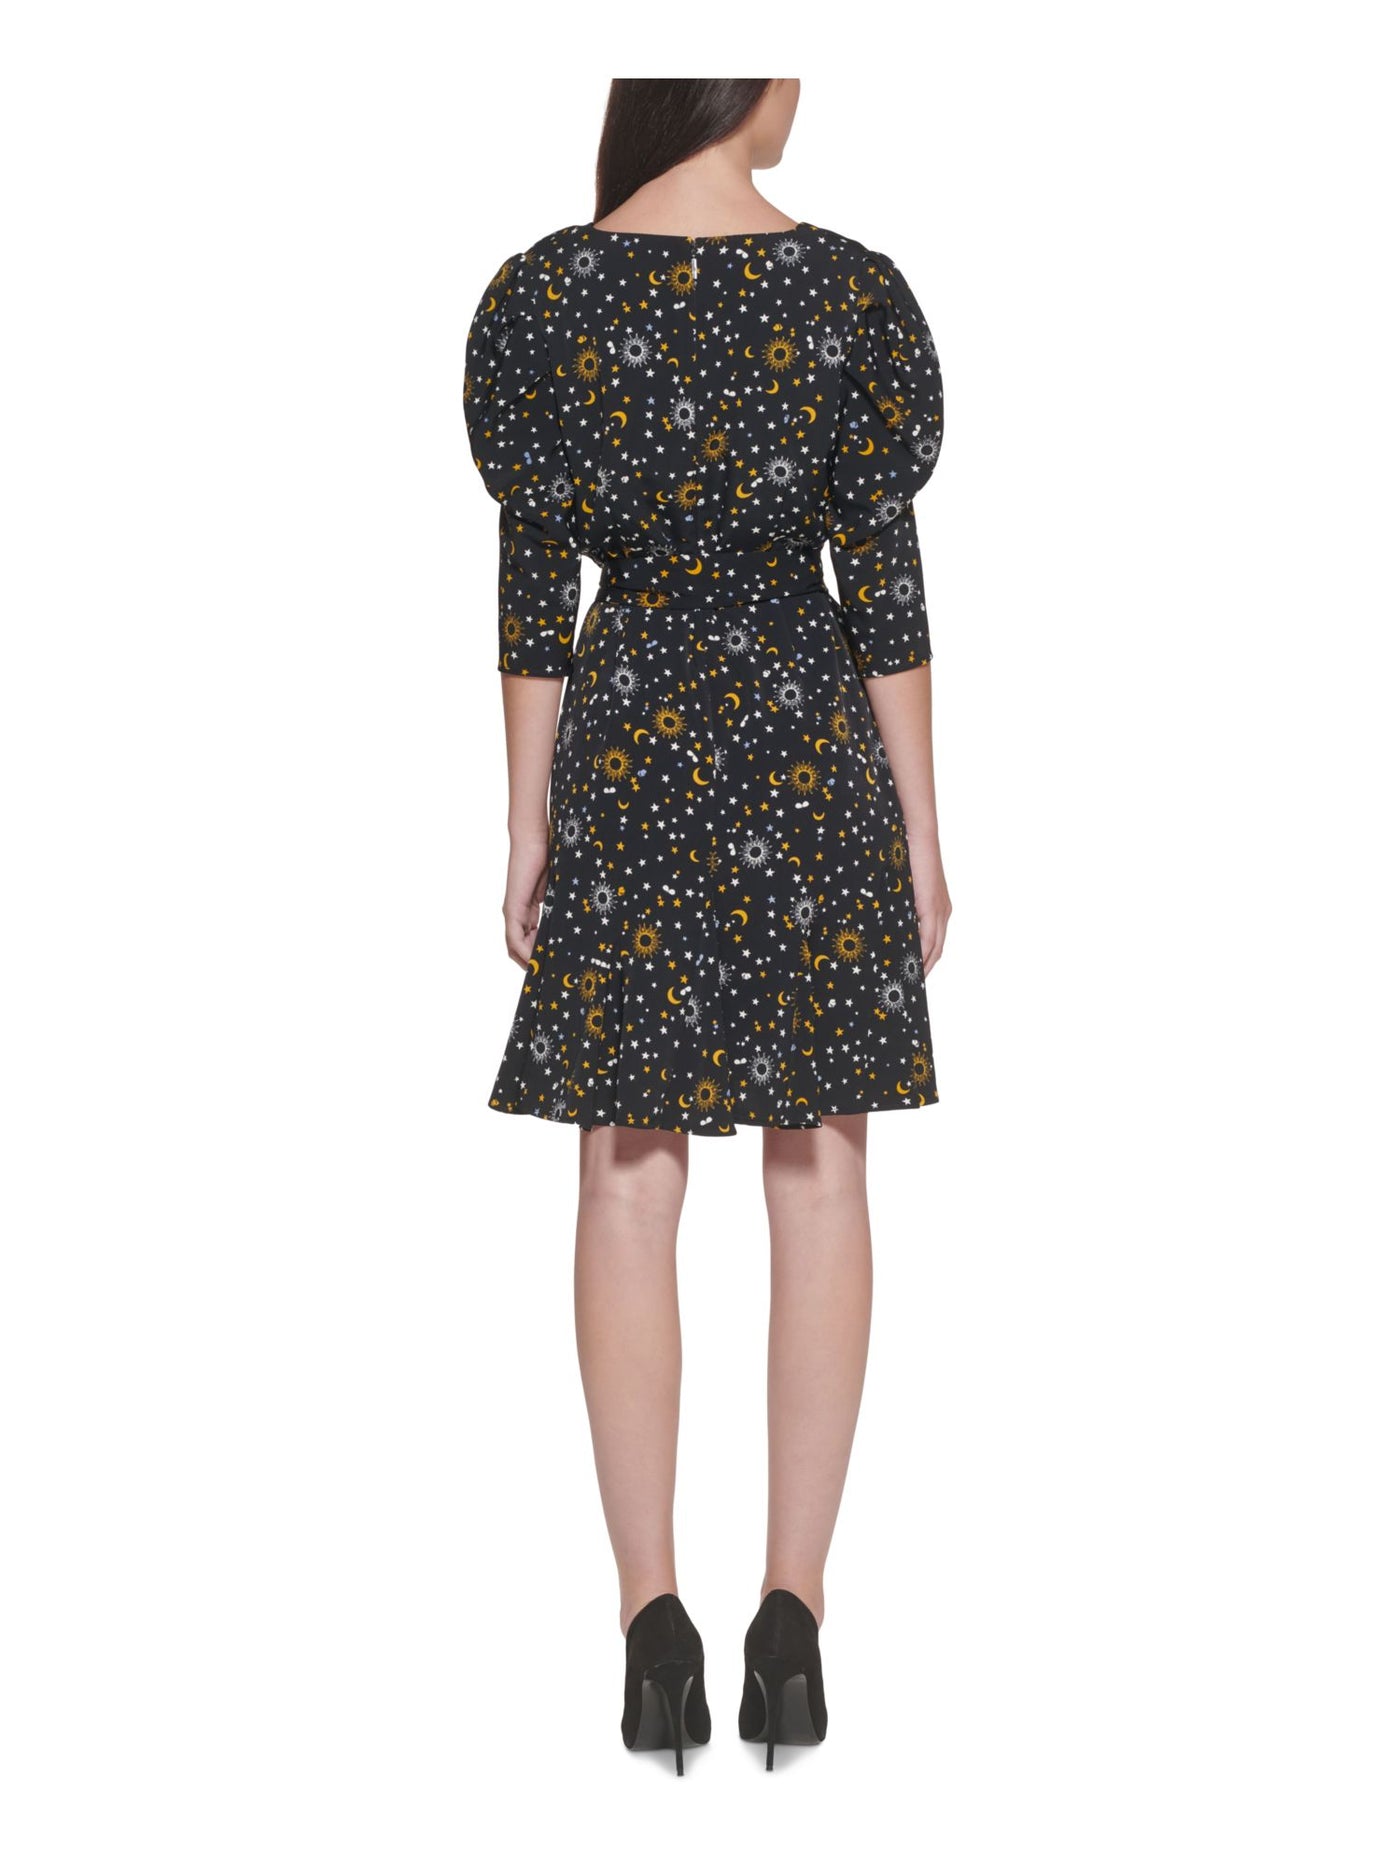 KARL LAGERFELD Womens Black Tie Ruched Printed 3/4 Sleeve V Neck Above The Knee Party Fit + Flare Dress 4